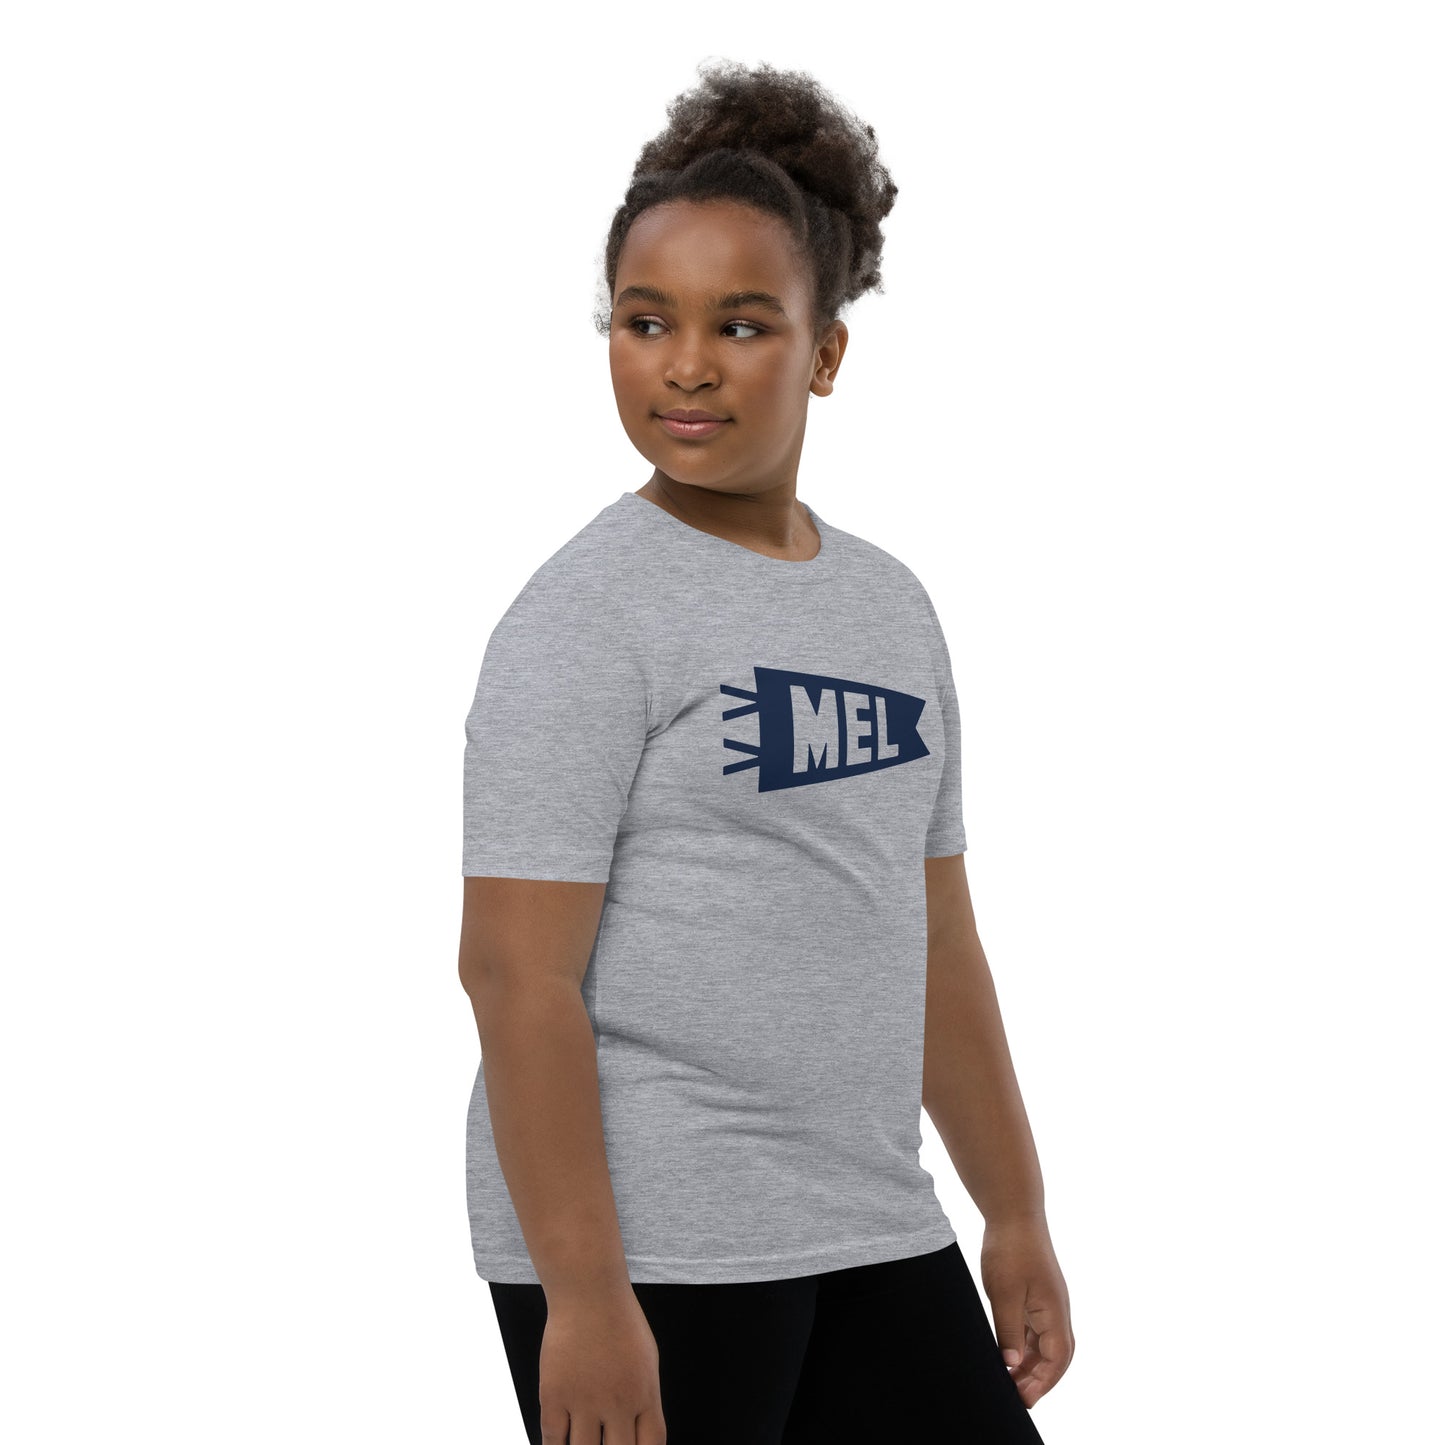 Kid's Airport Code Tee - Navy Blue Graphic • MEL Melbourne • YHM Designs - Image 03